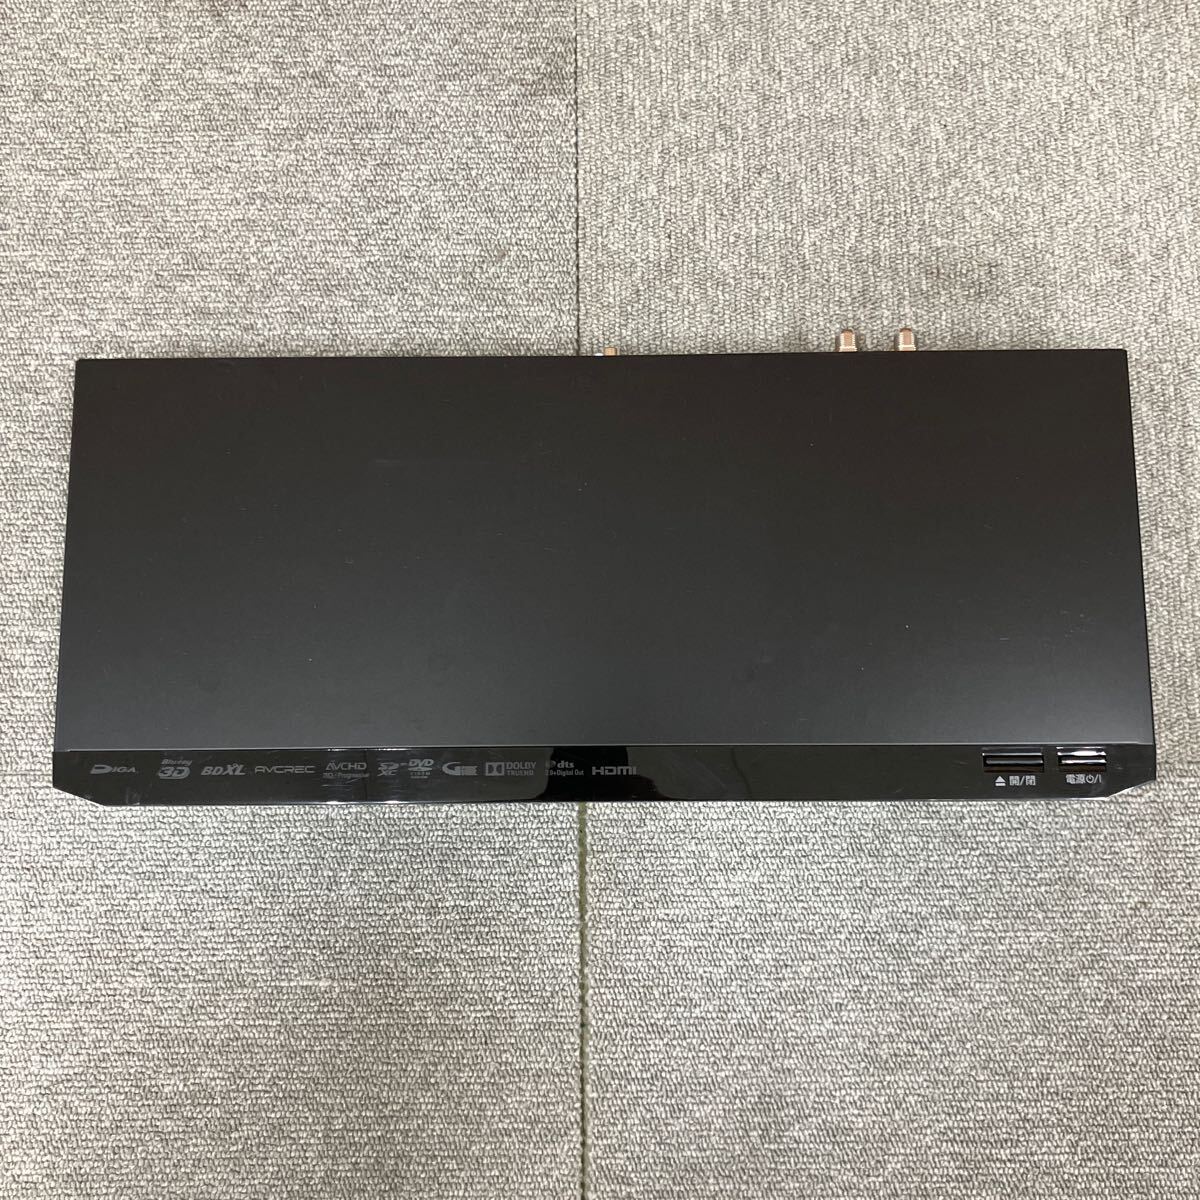 *[ selling out ]Panasonic Panasonic DIGA BLU-RAY DISC RECORDER Blue-ray disk recorder DMR-BRW500 remote control attaching . operation verification ending 